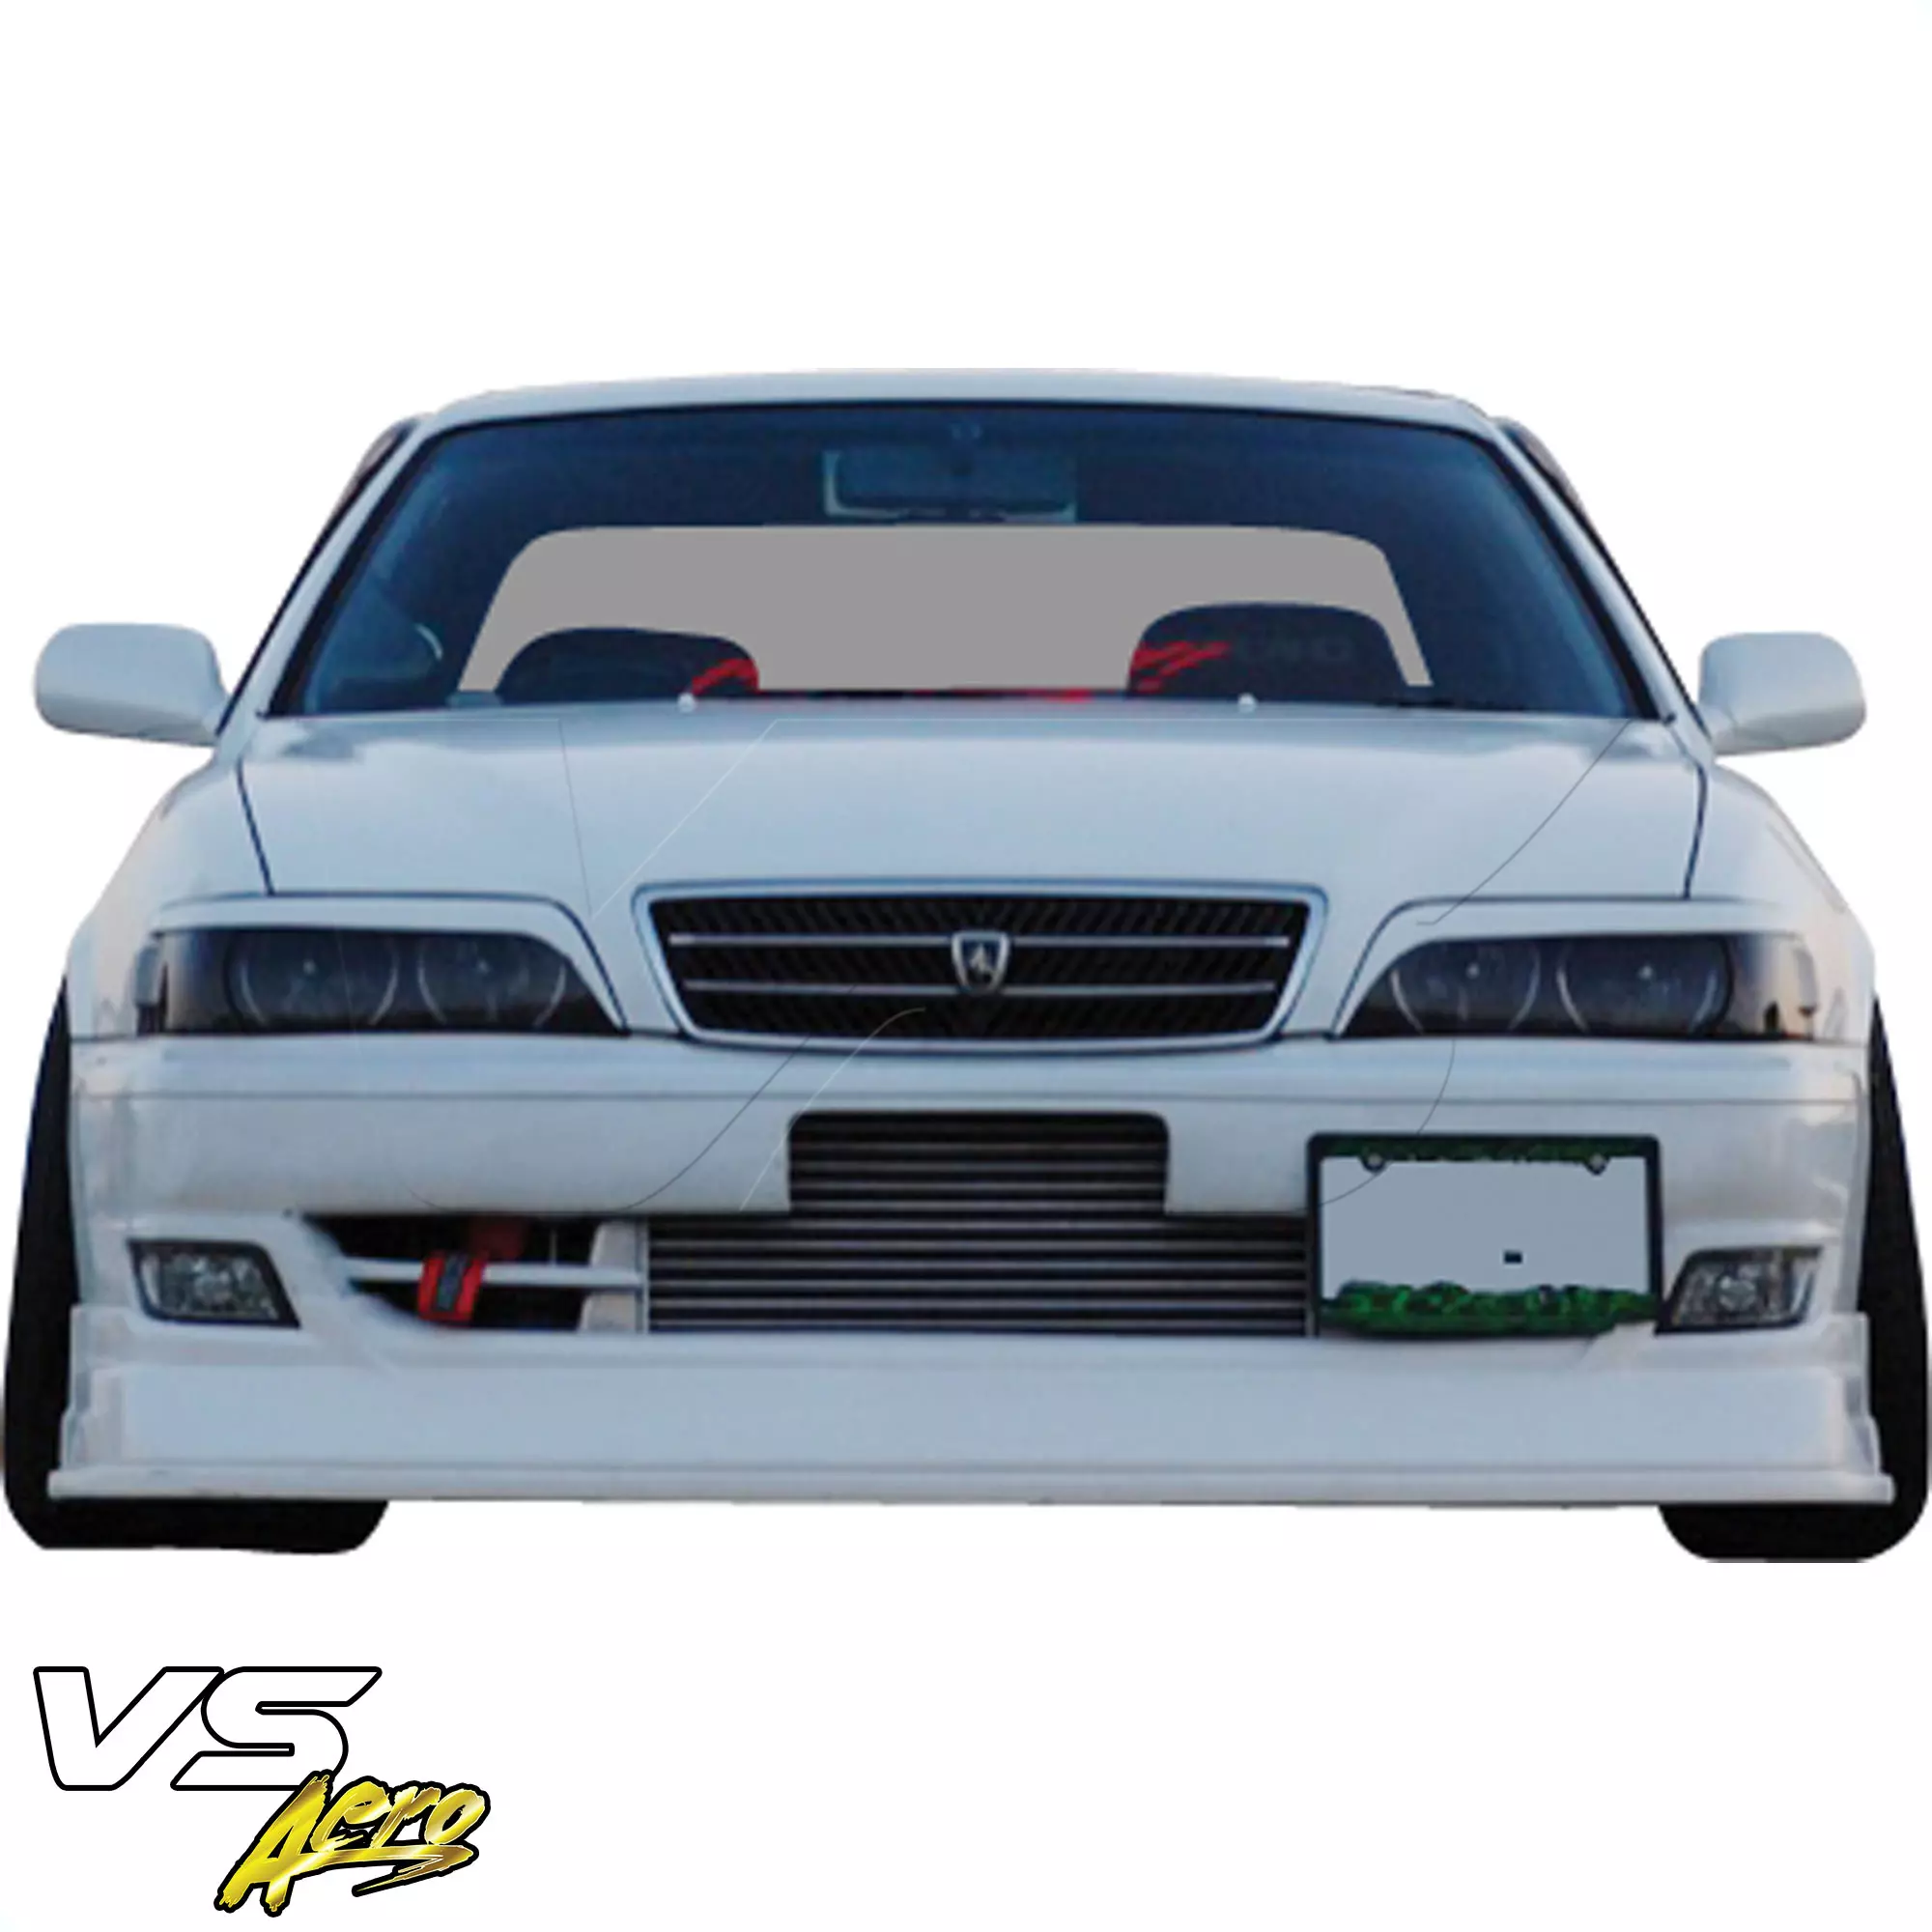 VSaero FRP TRAU Late Front Lip Valance > Toyota Chaser JZX100 1999-2000 - Image 10